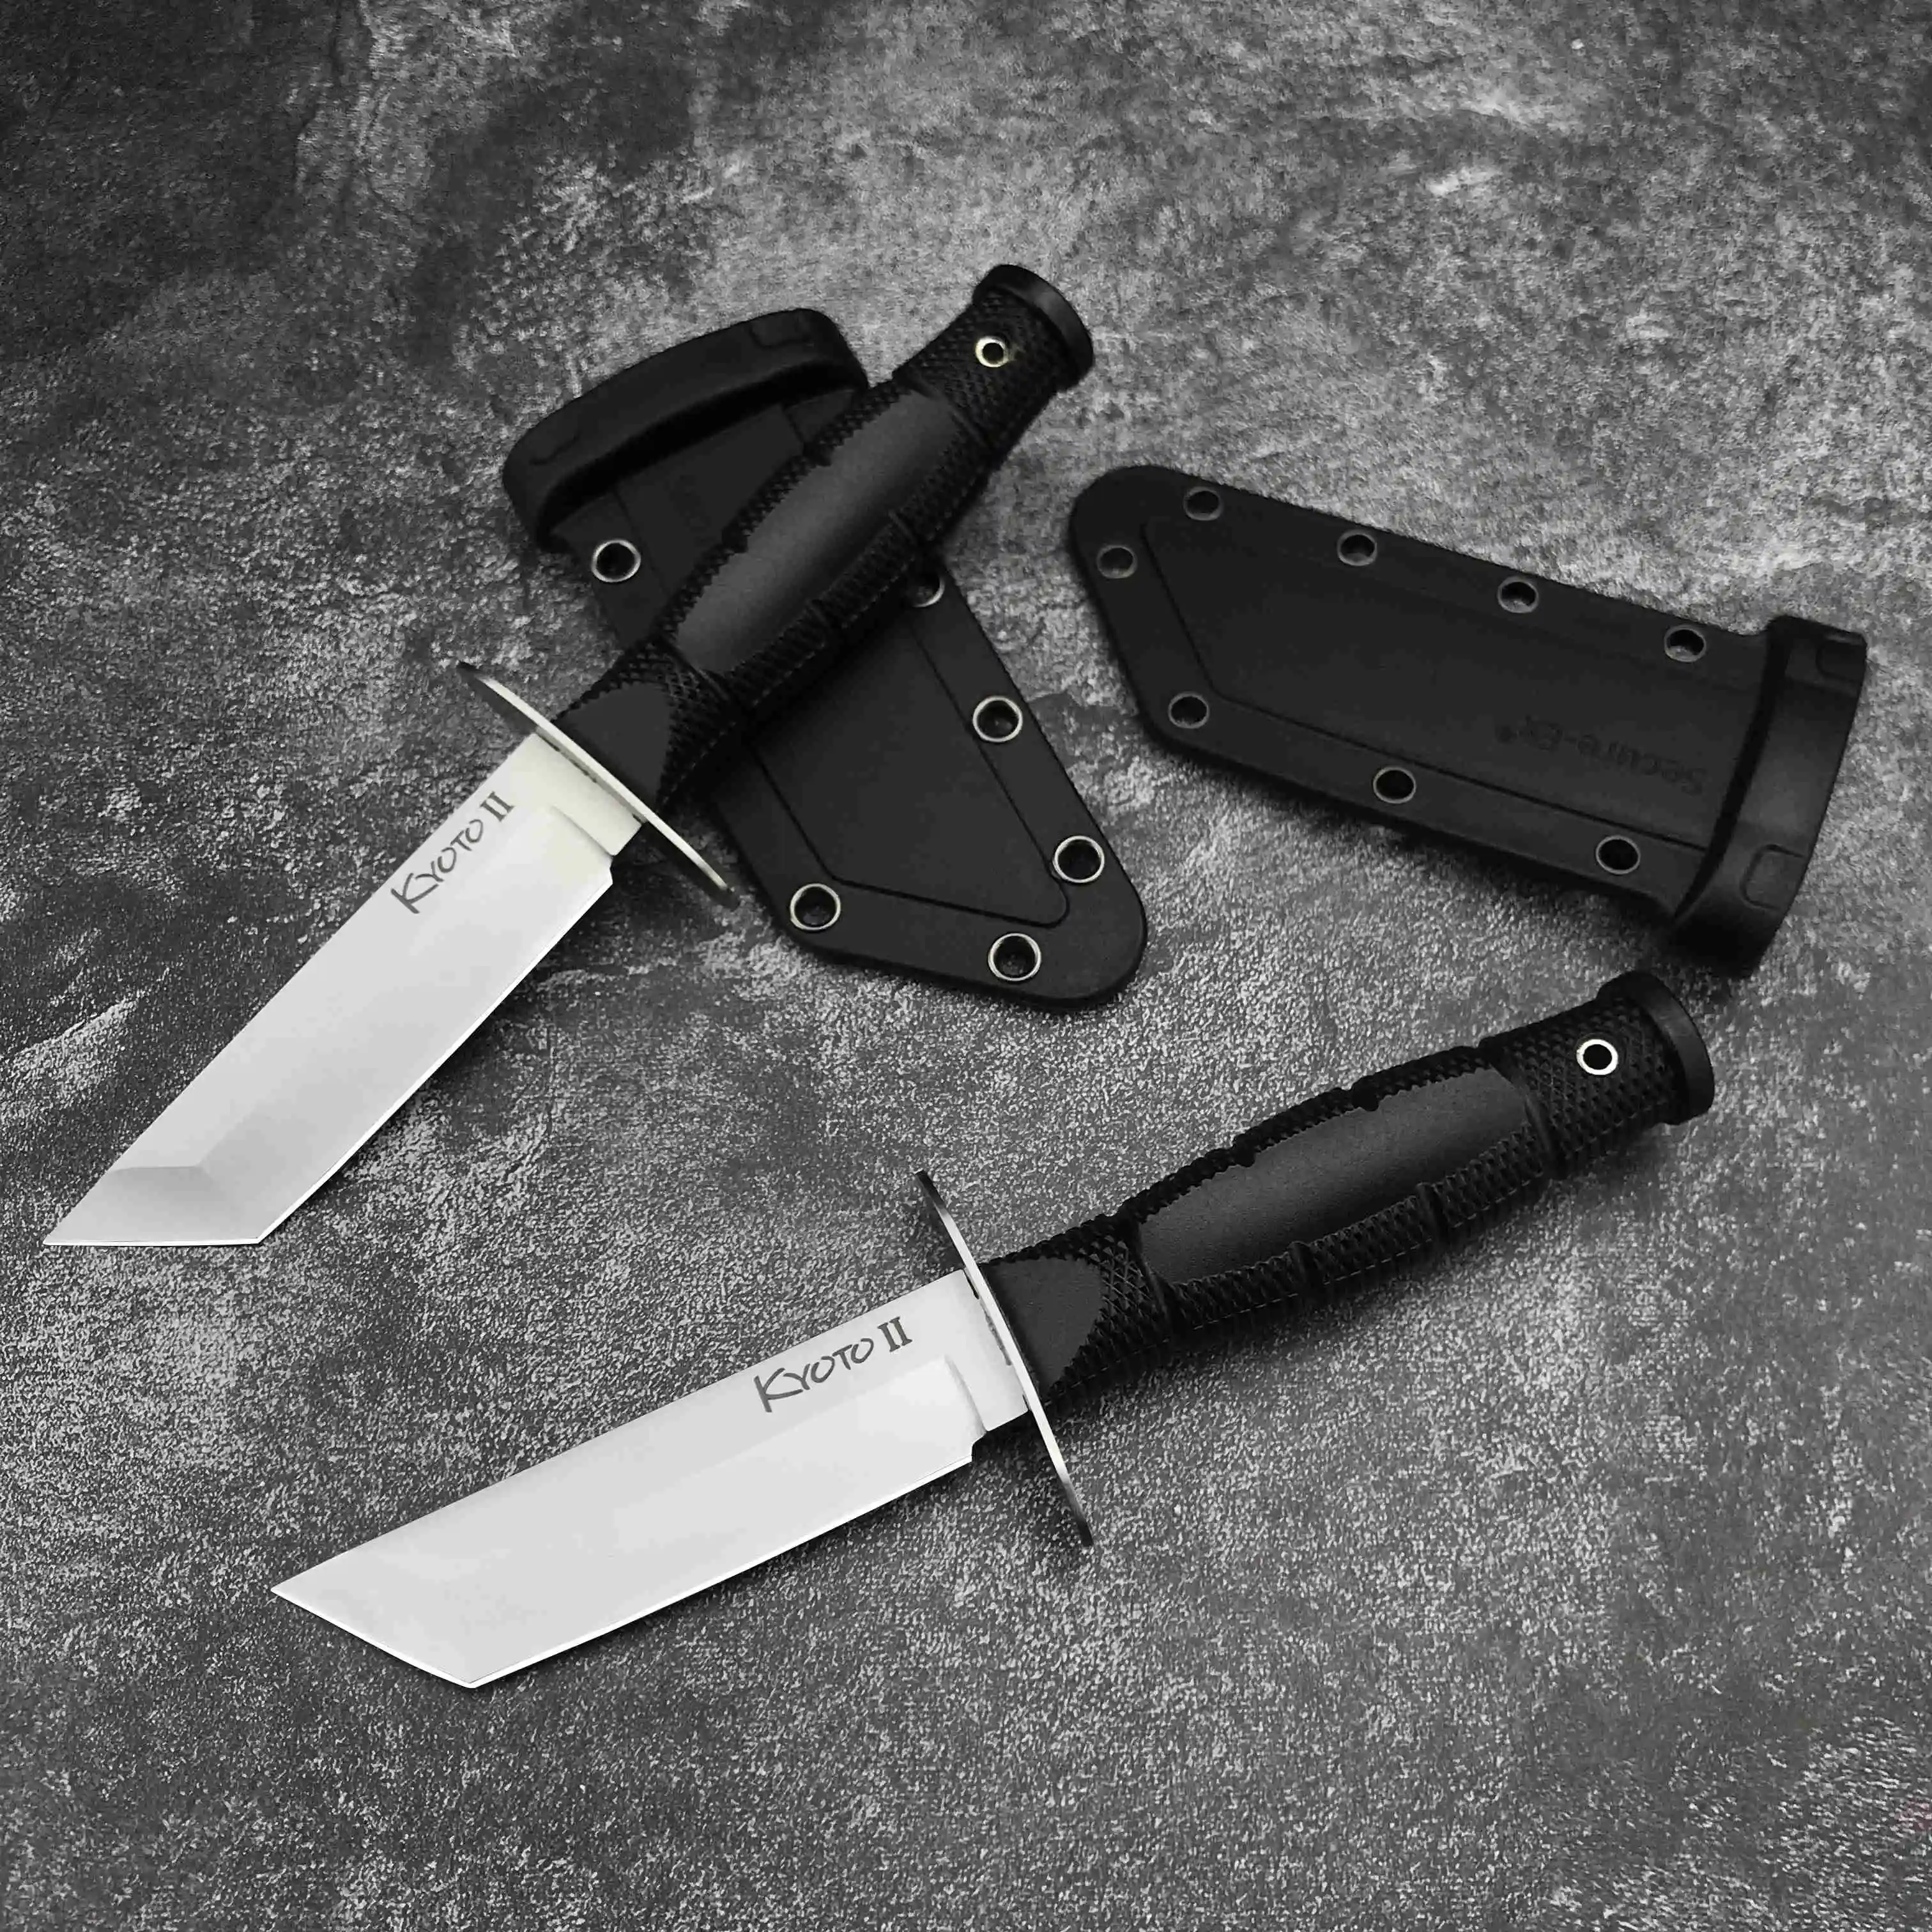 

3.54" Cold Steel 8Cr13Mov Tactical Knife Outdoor Survival Rescue Knife Self Defense Military Tool Collection Gift Straight Knife